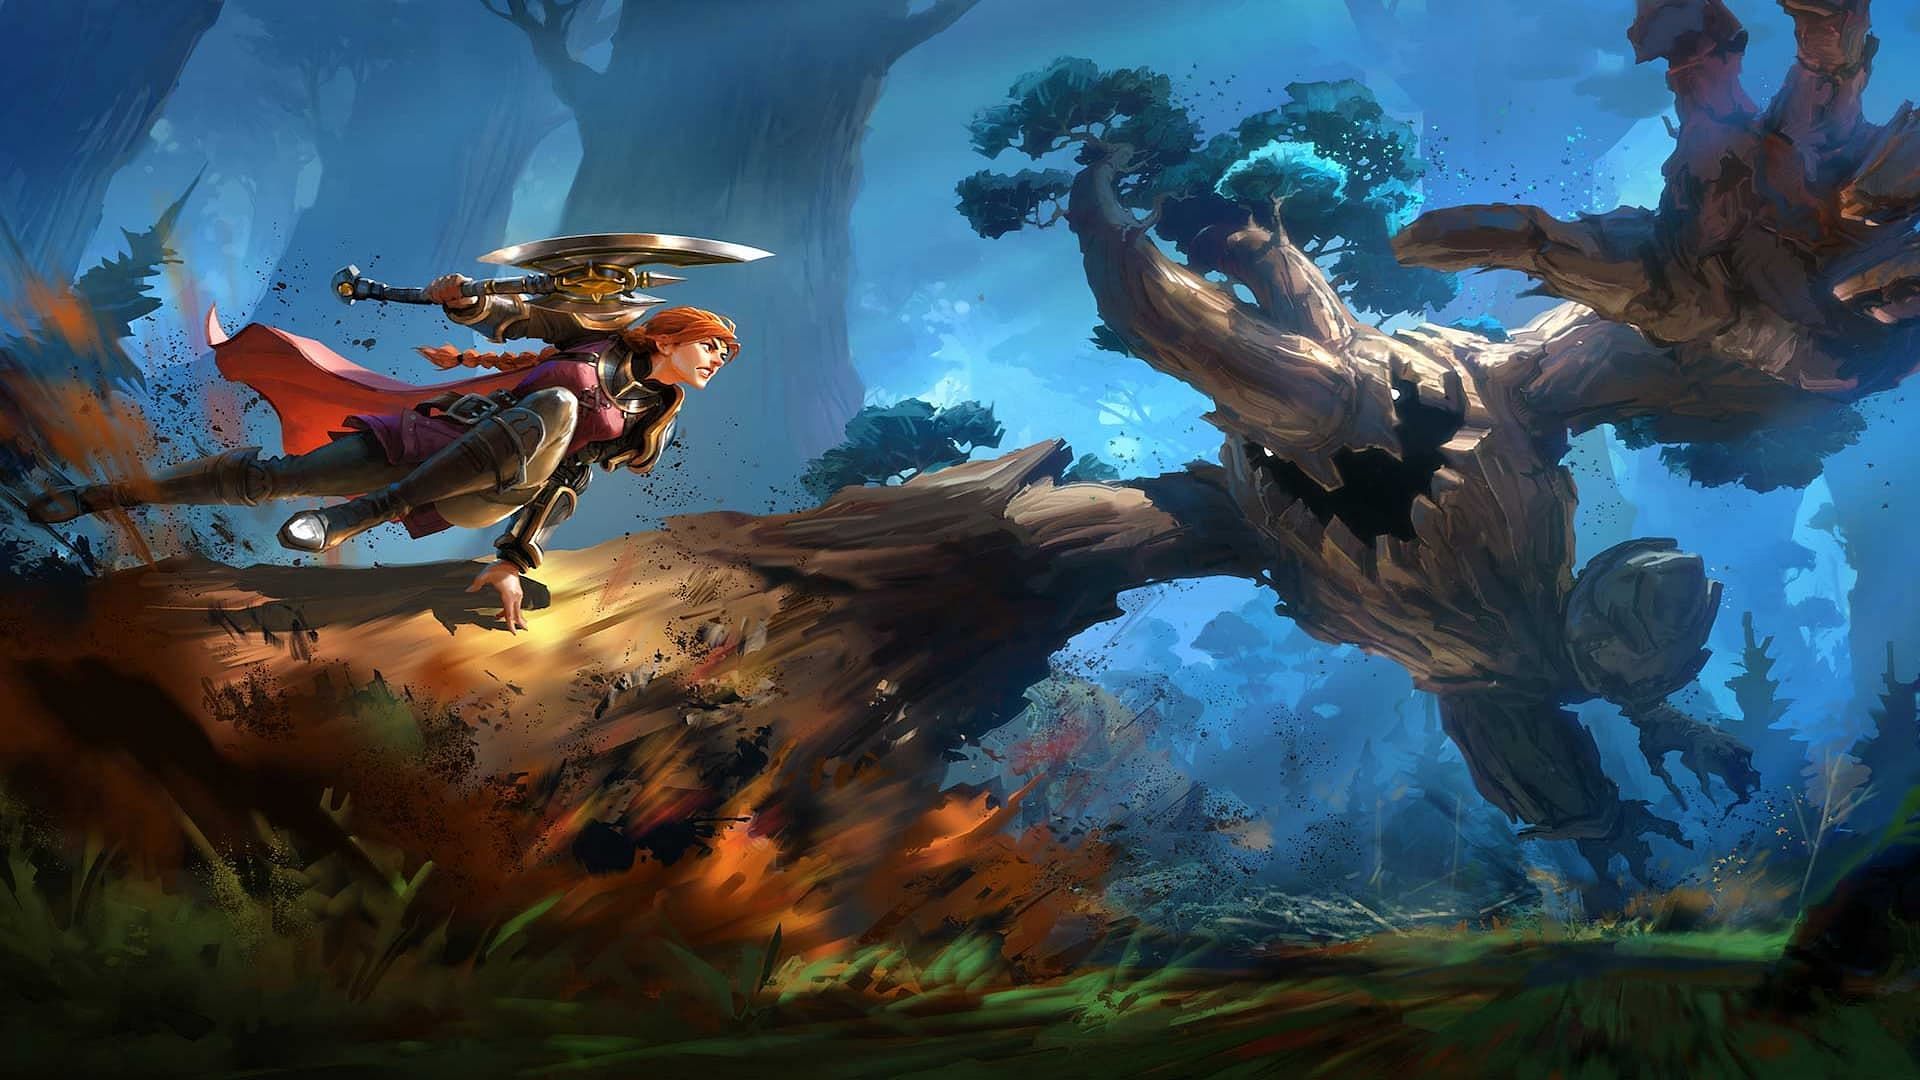 Player battling a tree monster in Albion Online